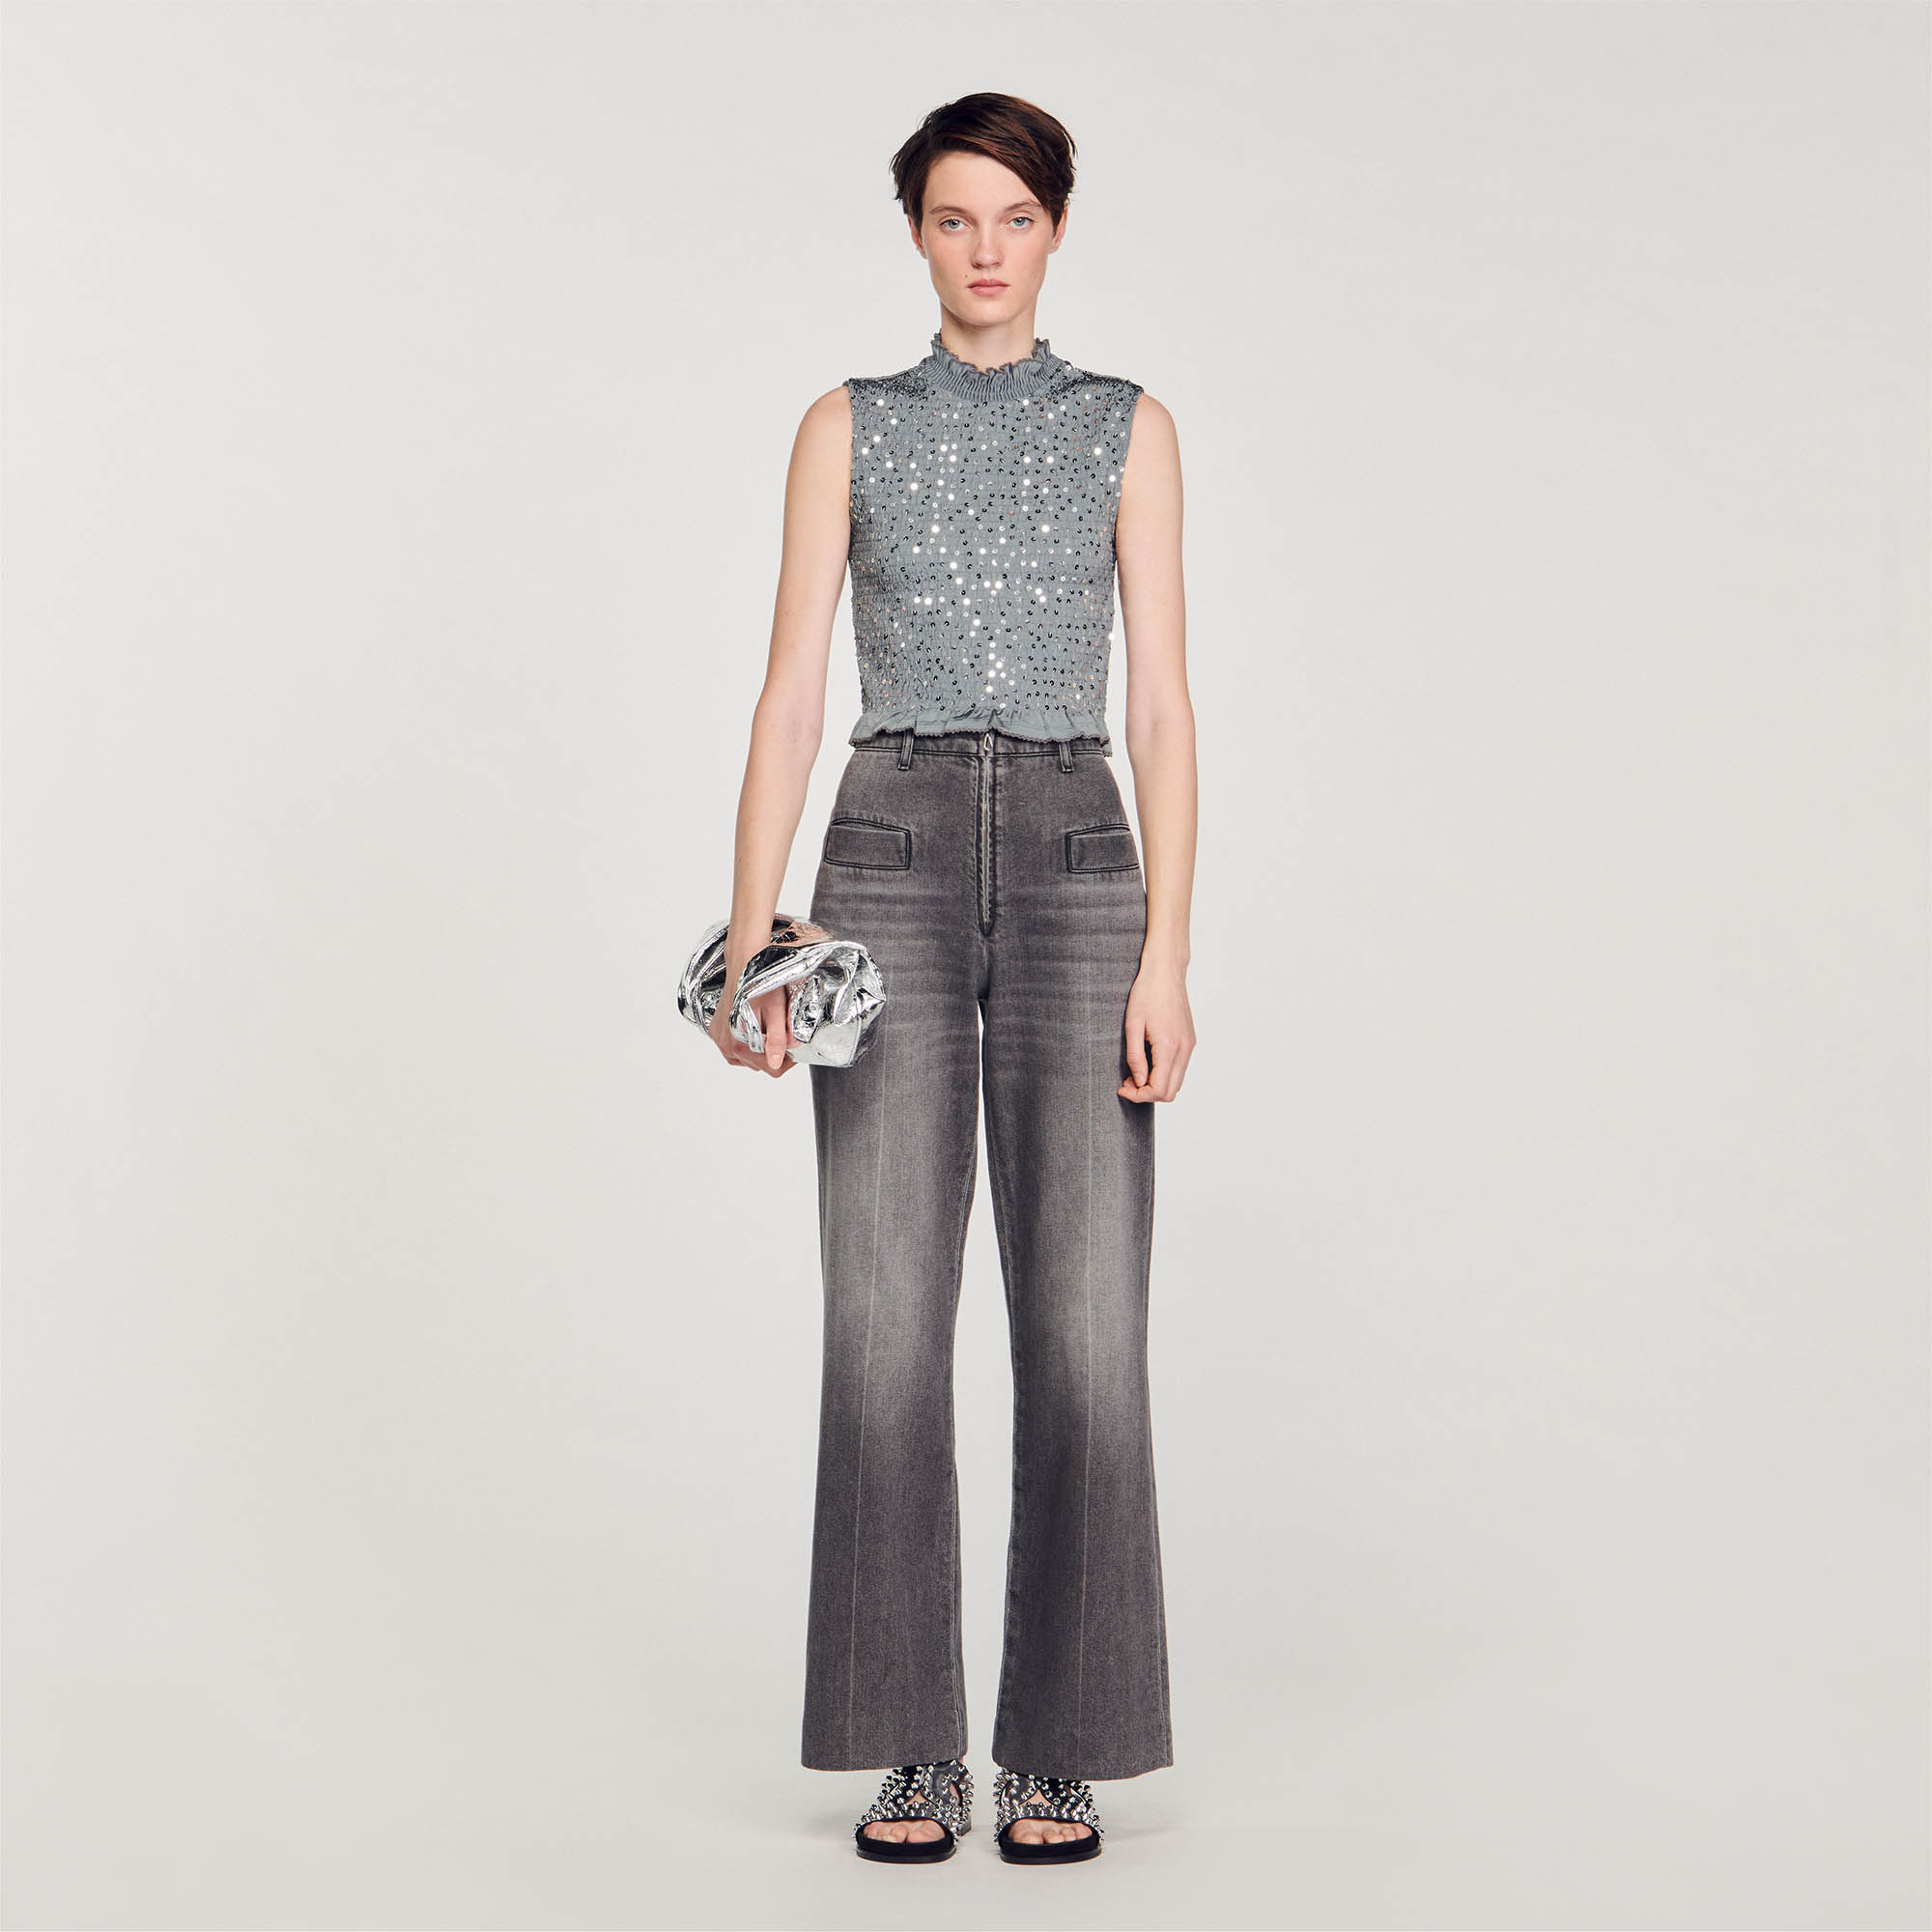 Sandro Smocked top with sequins